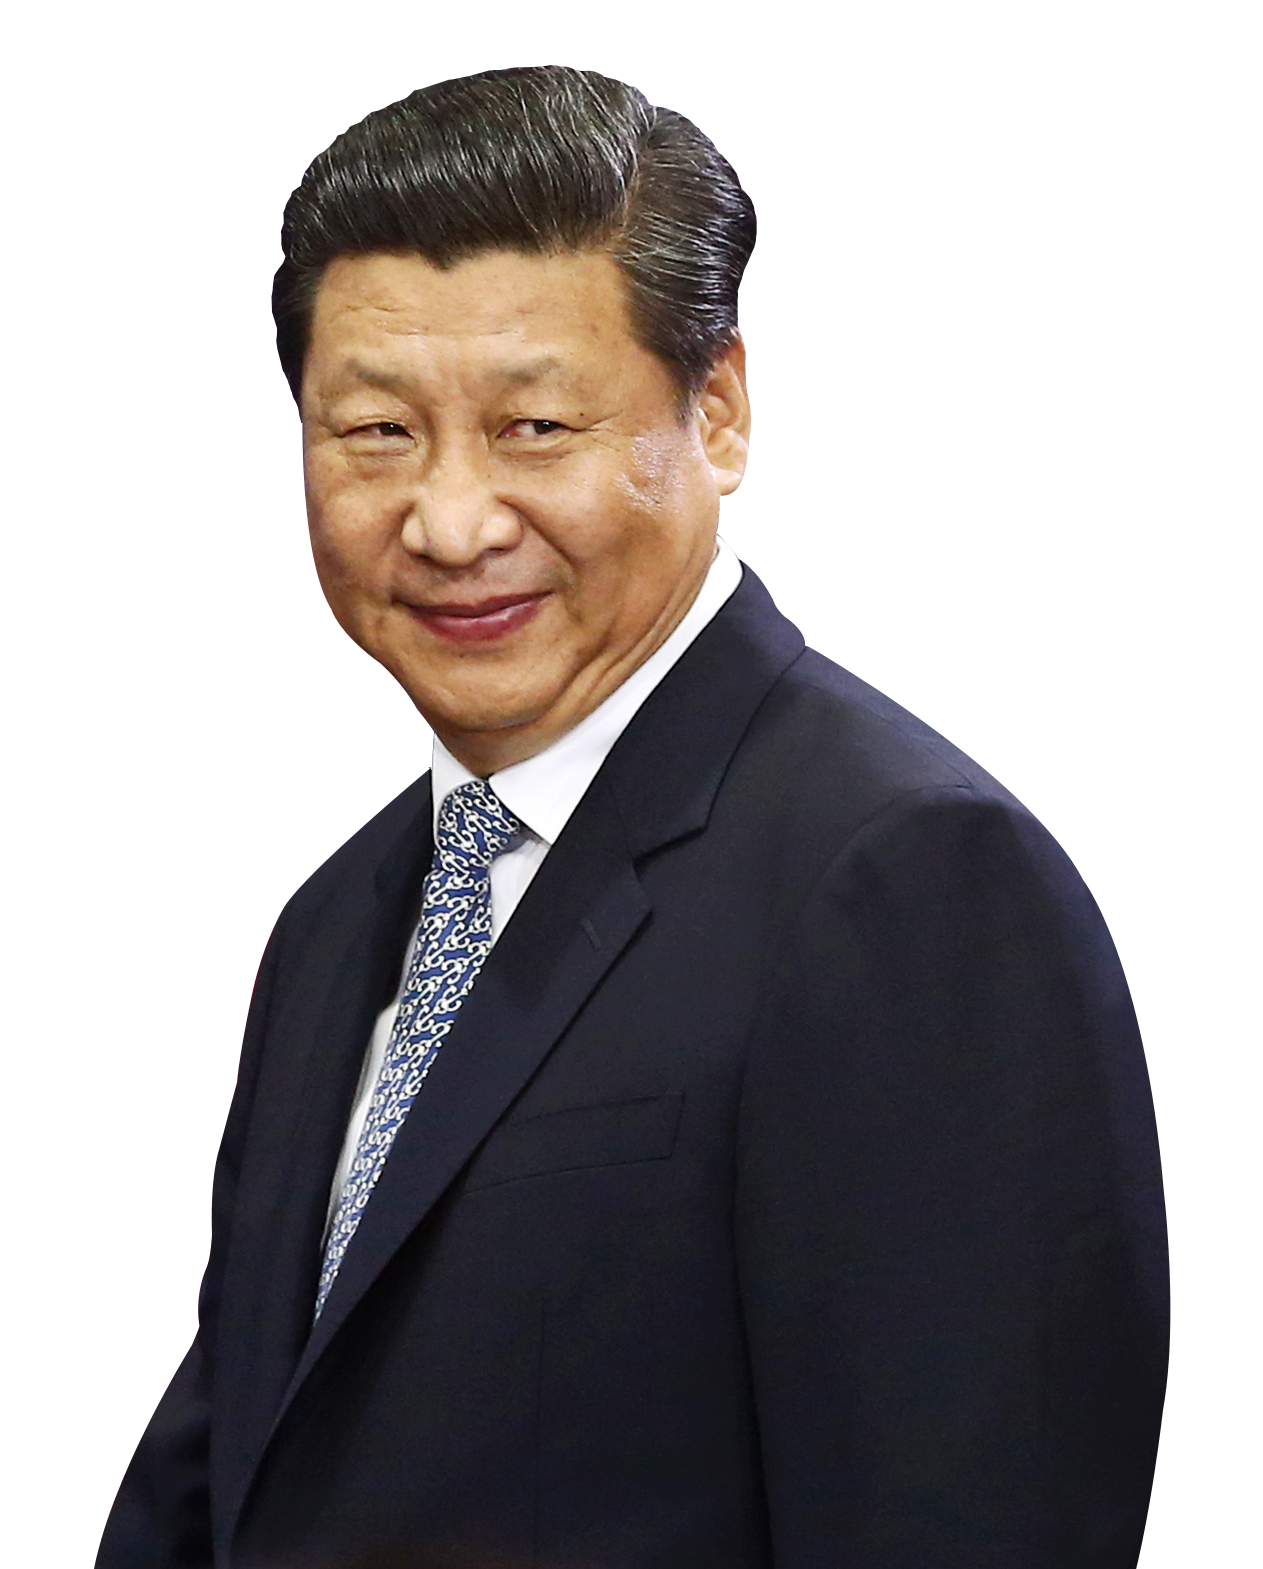 Jinping Xi Necktie States United China Wear PNG Image